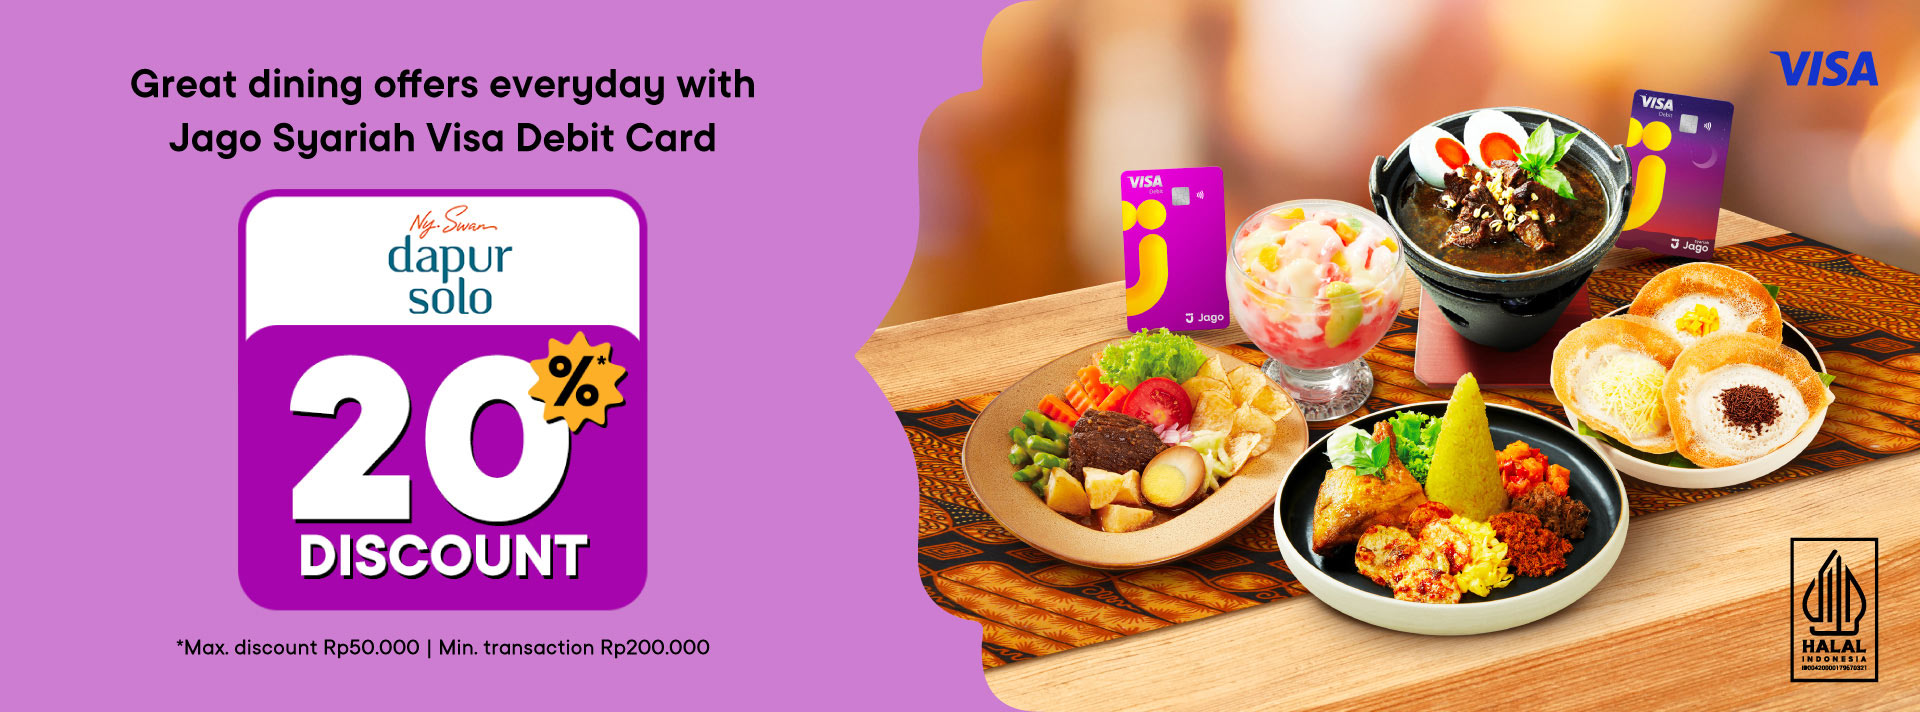 20% discount for dining with Jago Visa Debit Card